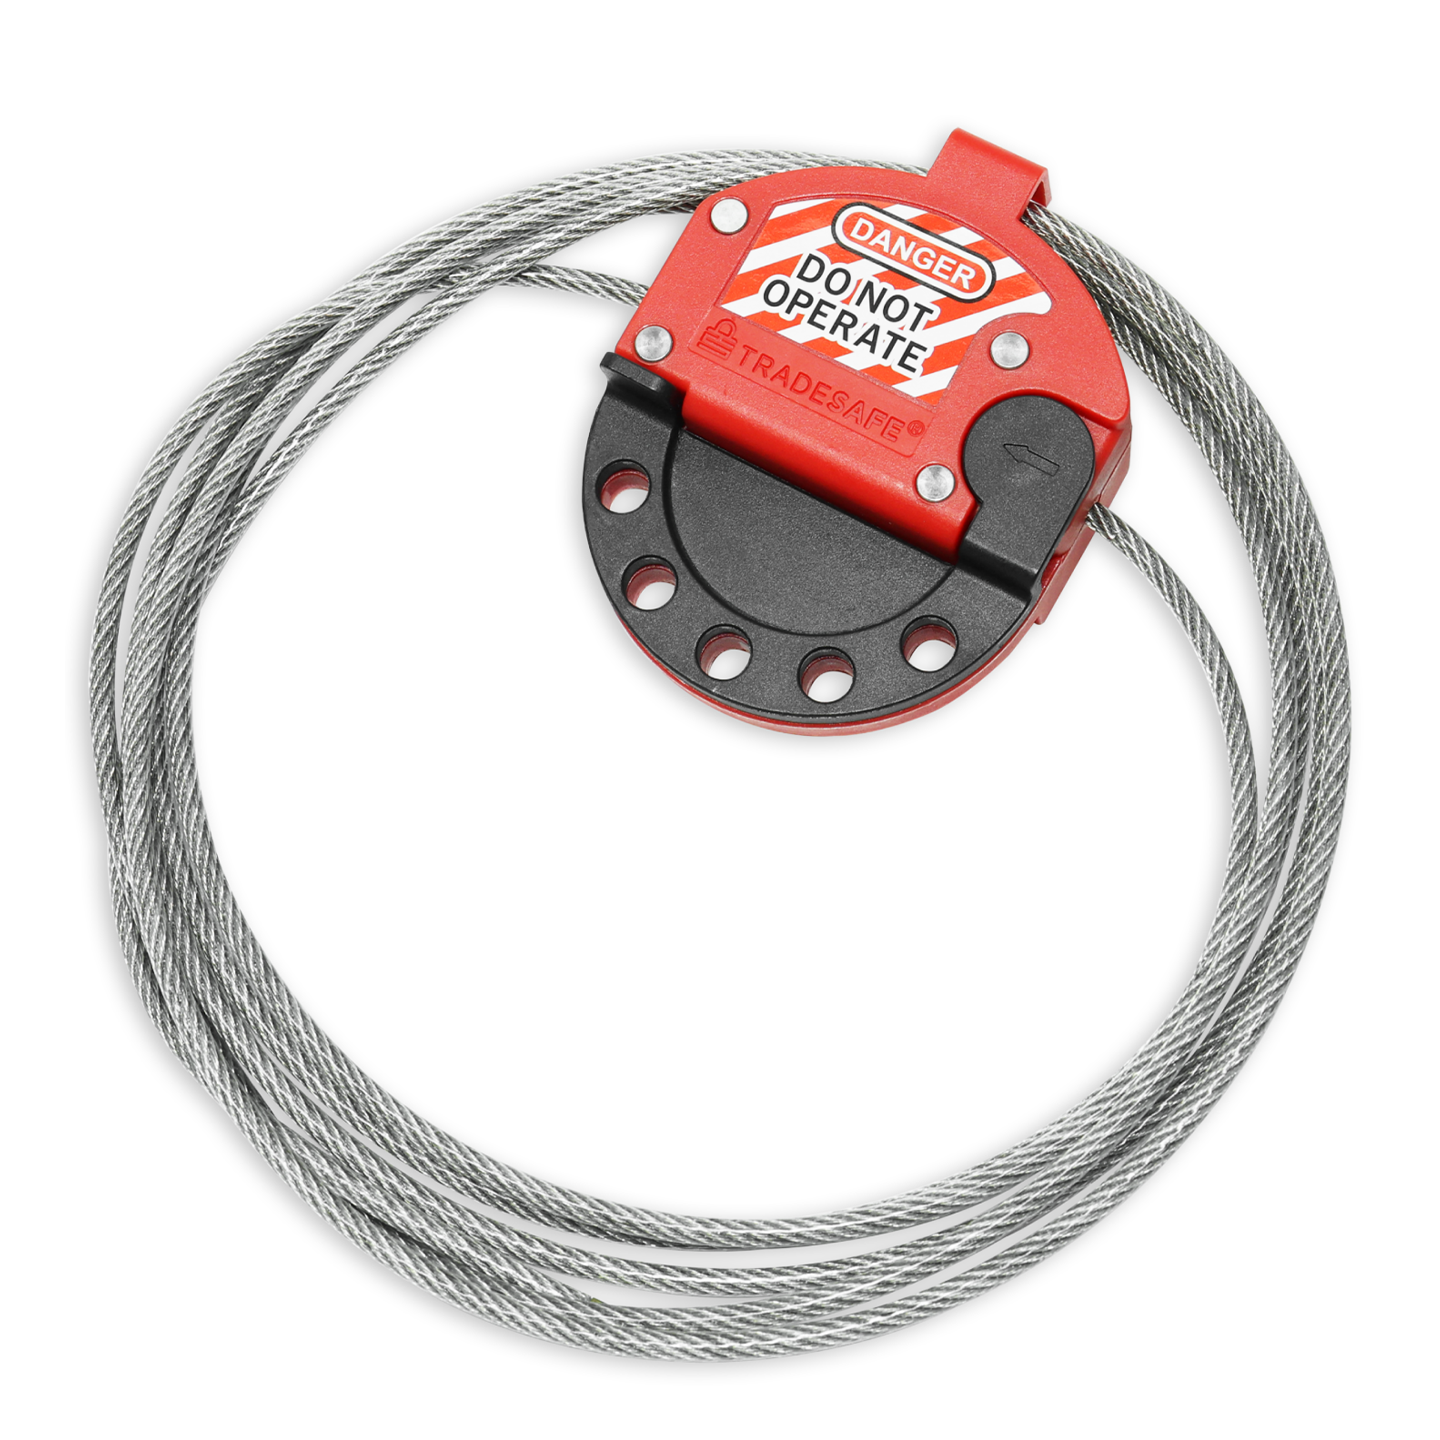 Adjustable Cable Lock Out Device - 10ft